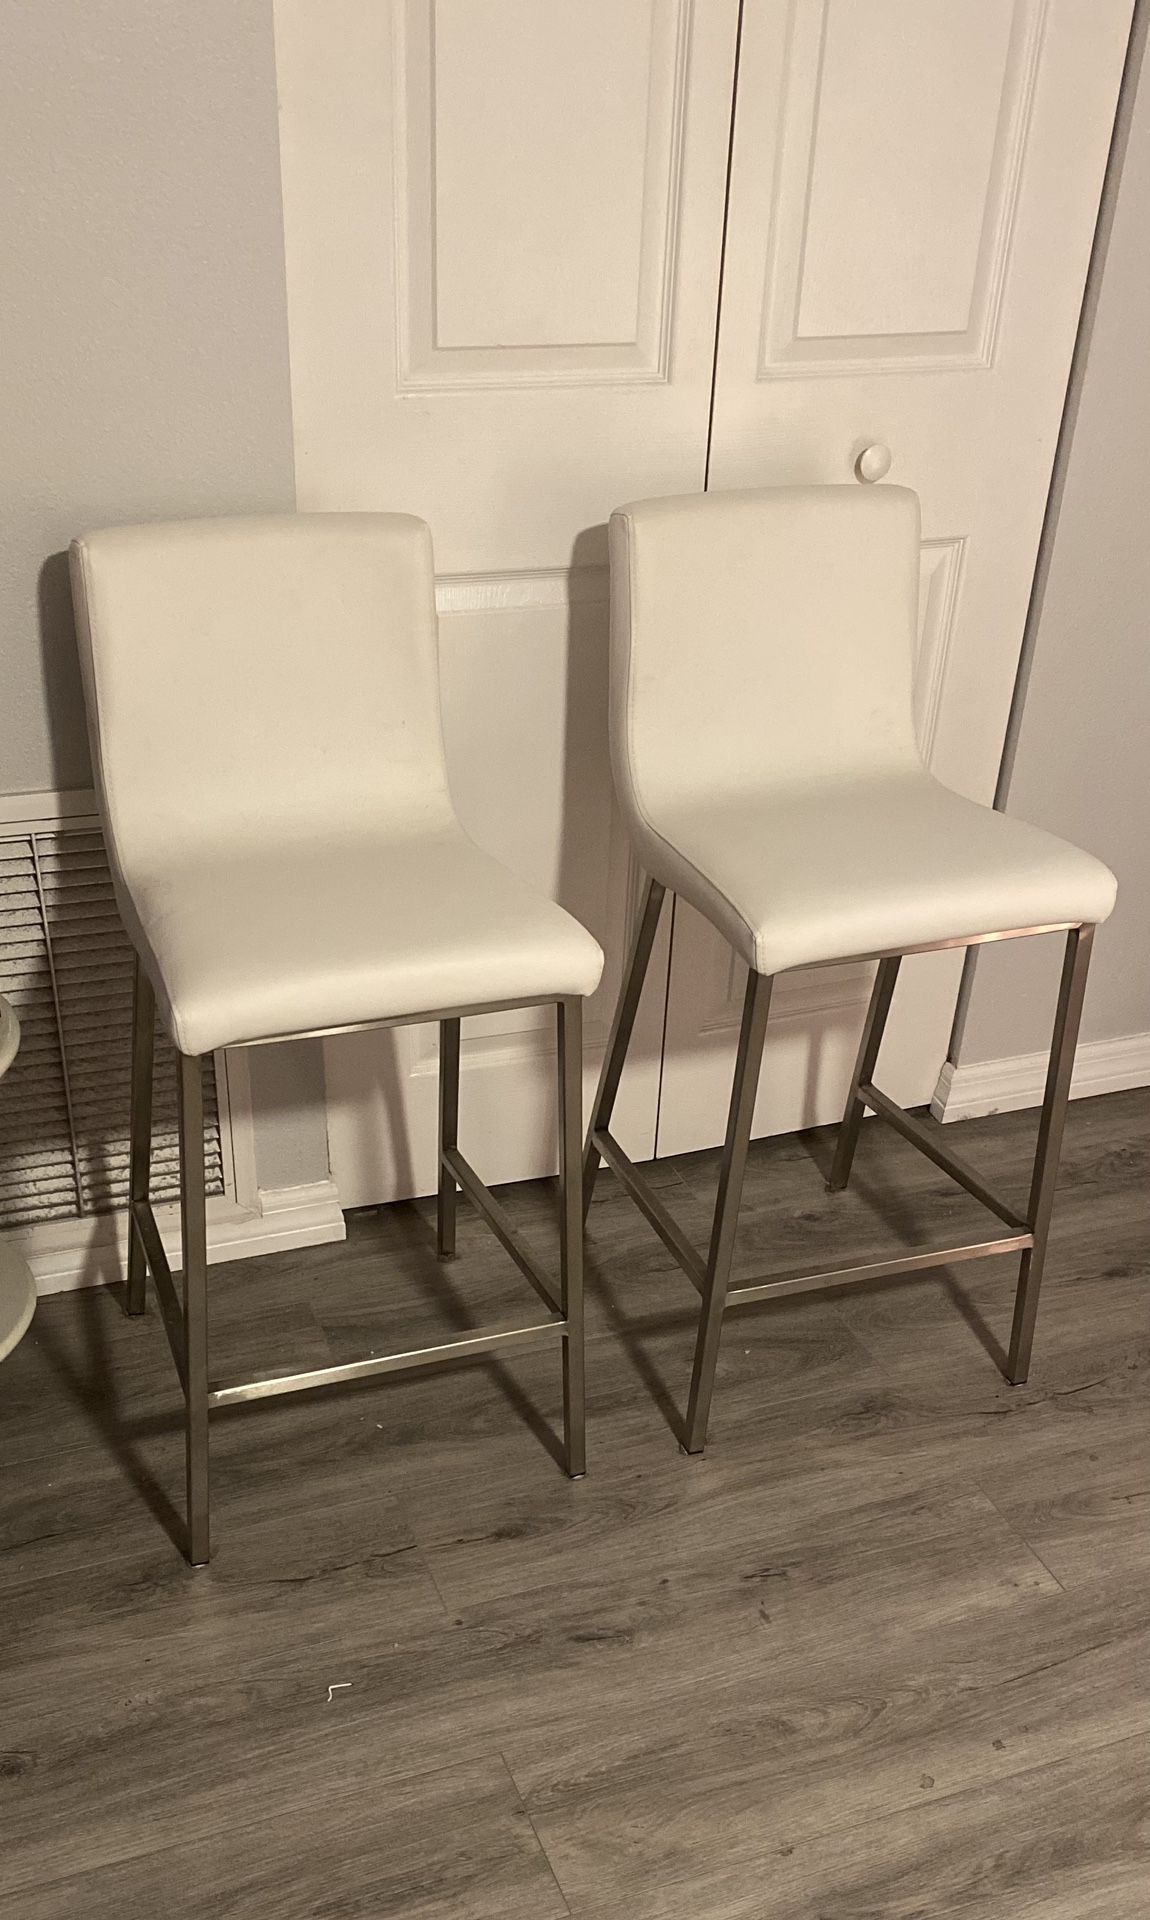 2 White Leather and Silver Bar Stools - $200 Total